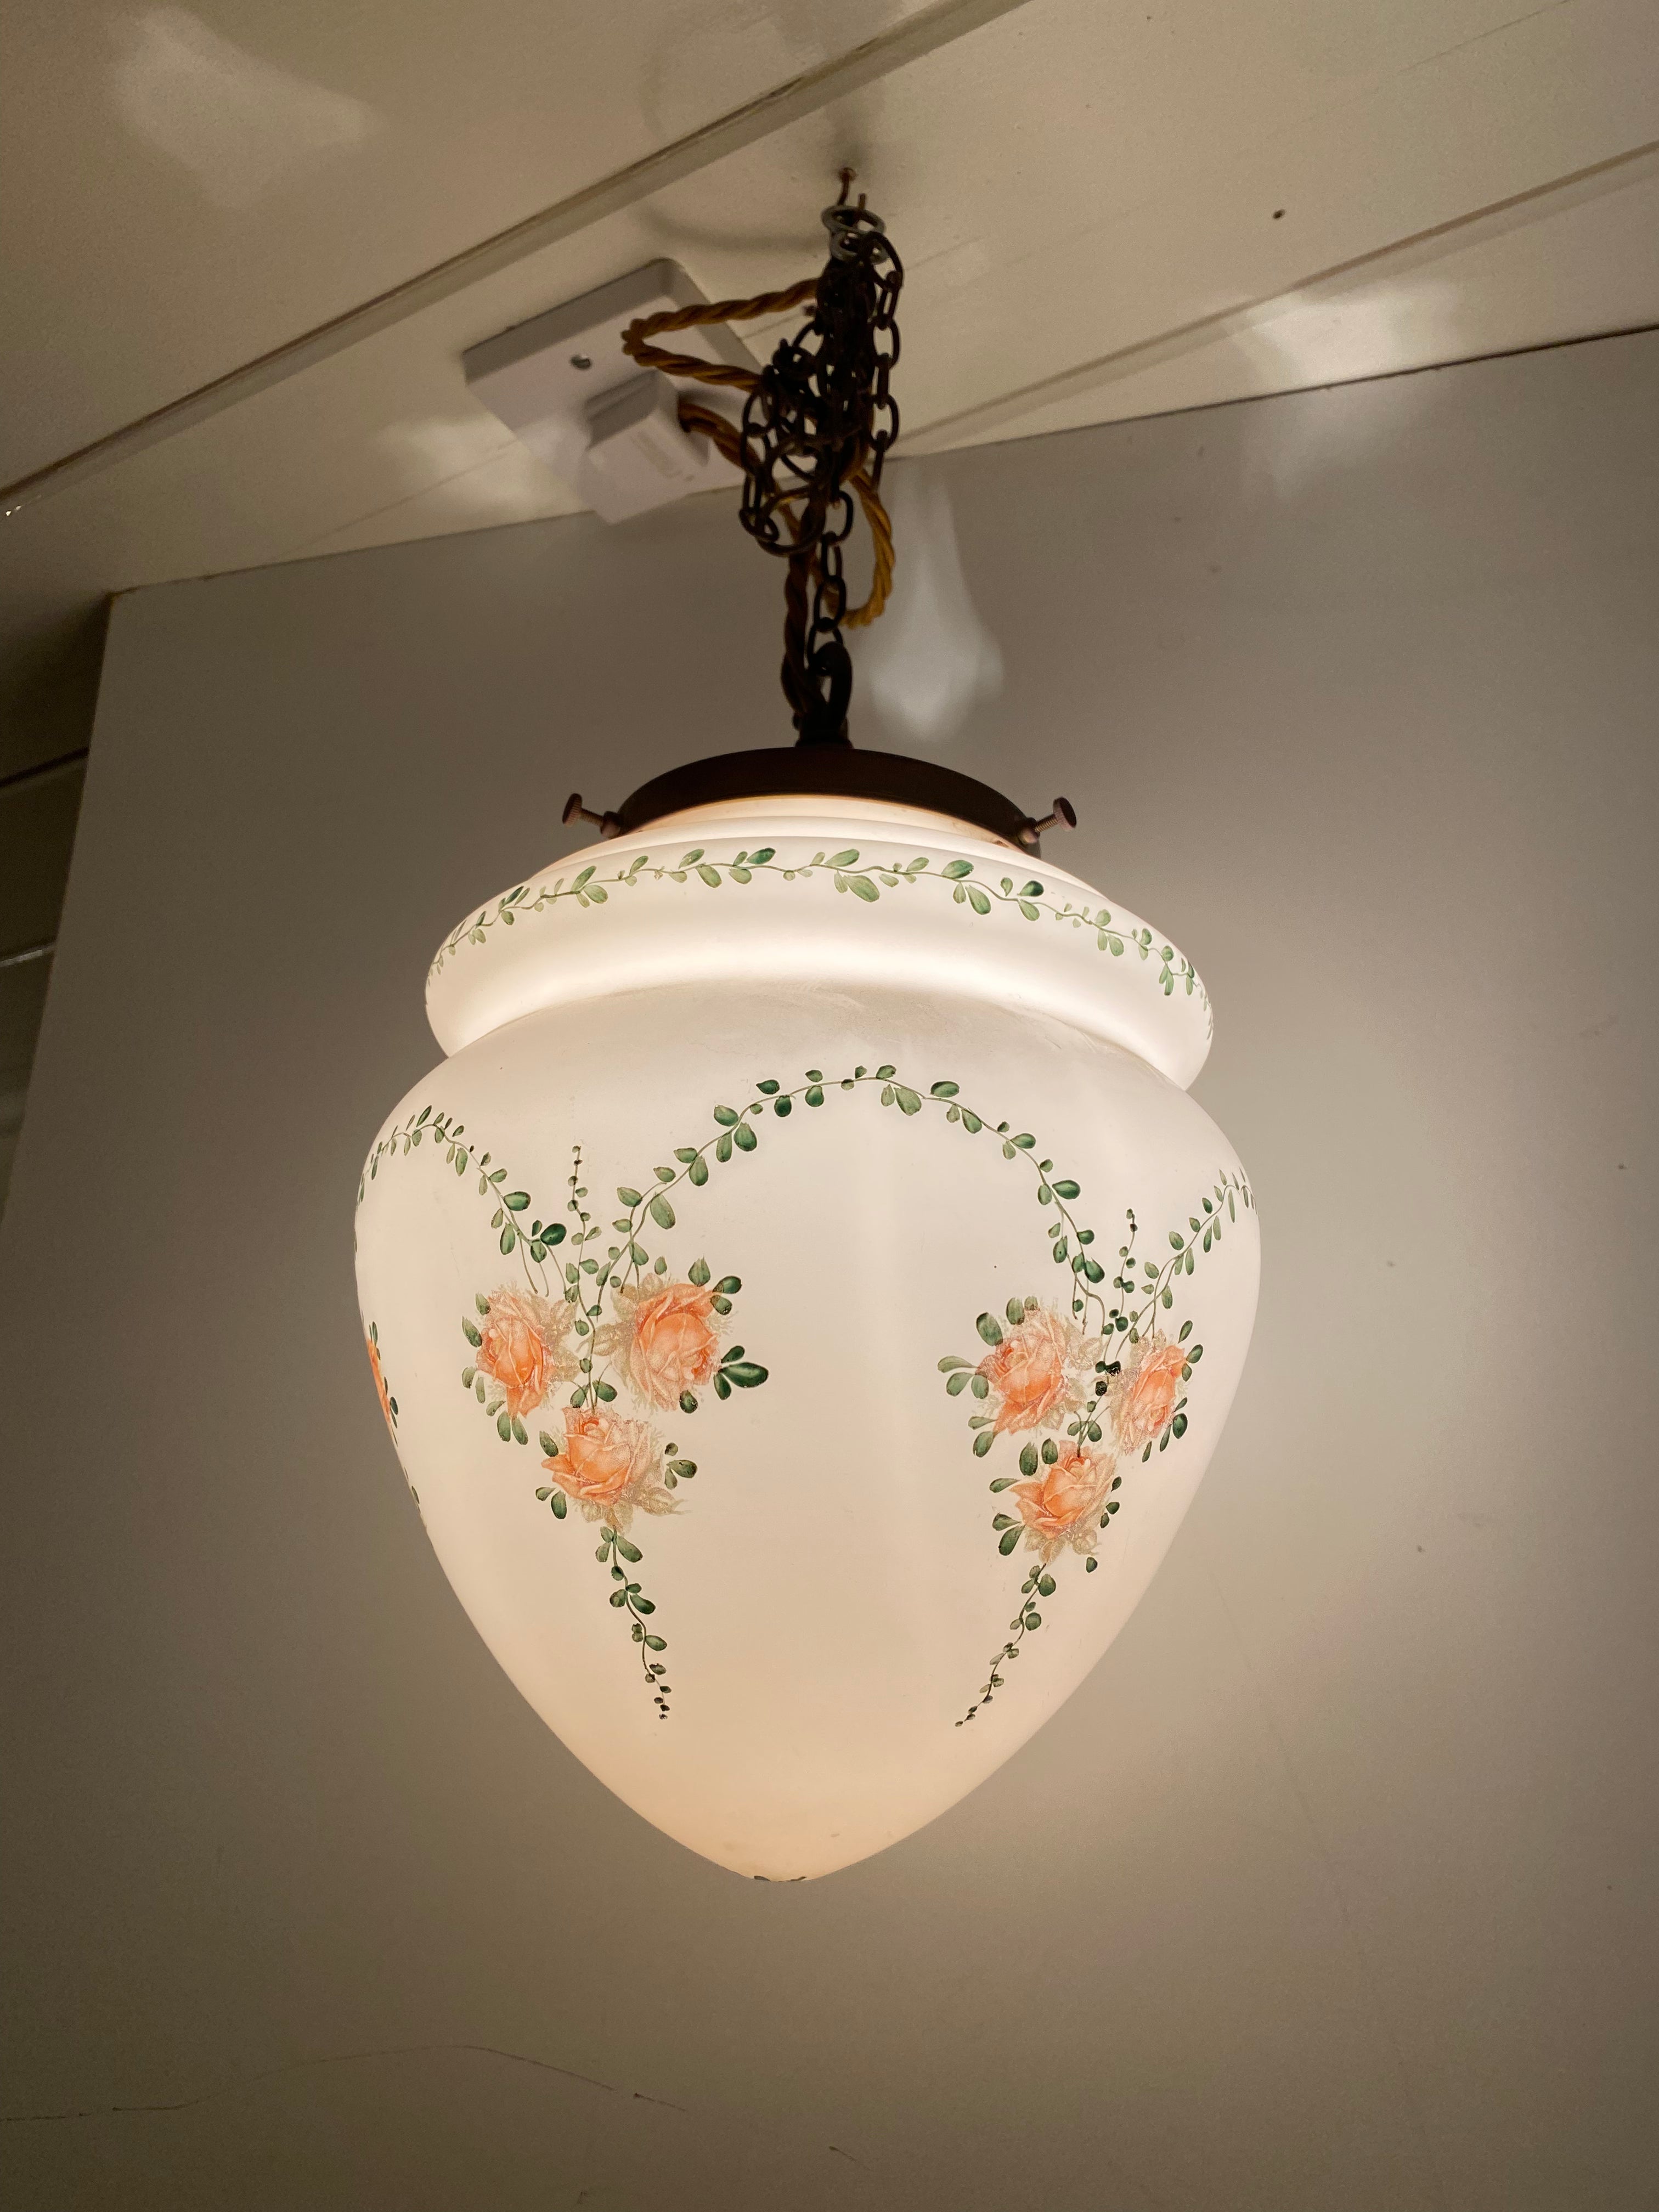 Bathroom Safe Ceiling Hanging Glass Lampshade with Rose Transfers C.1930